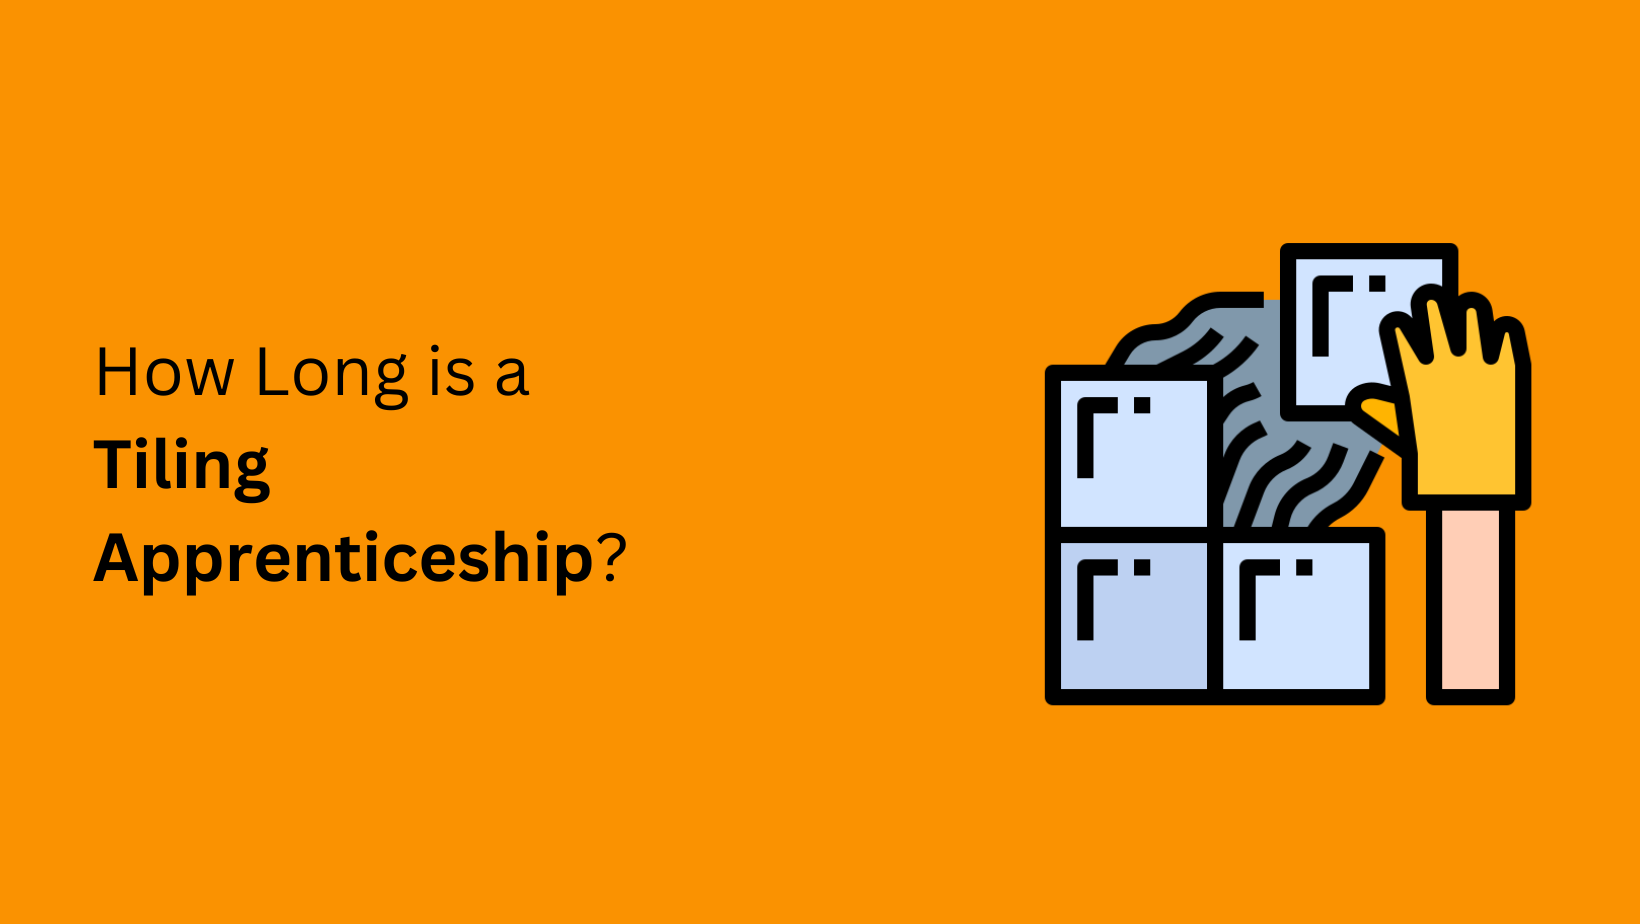 How Long is a Tiling Apprenticeship